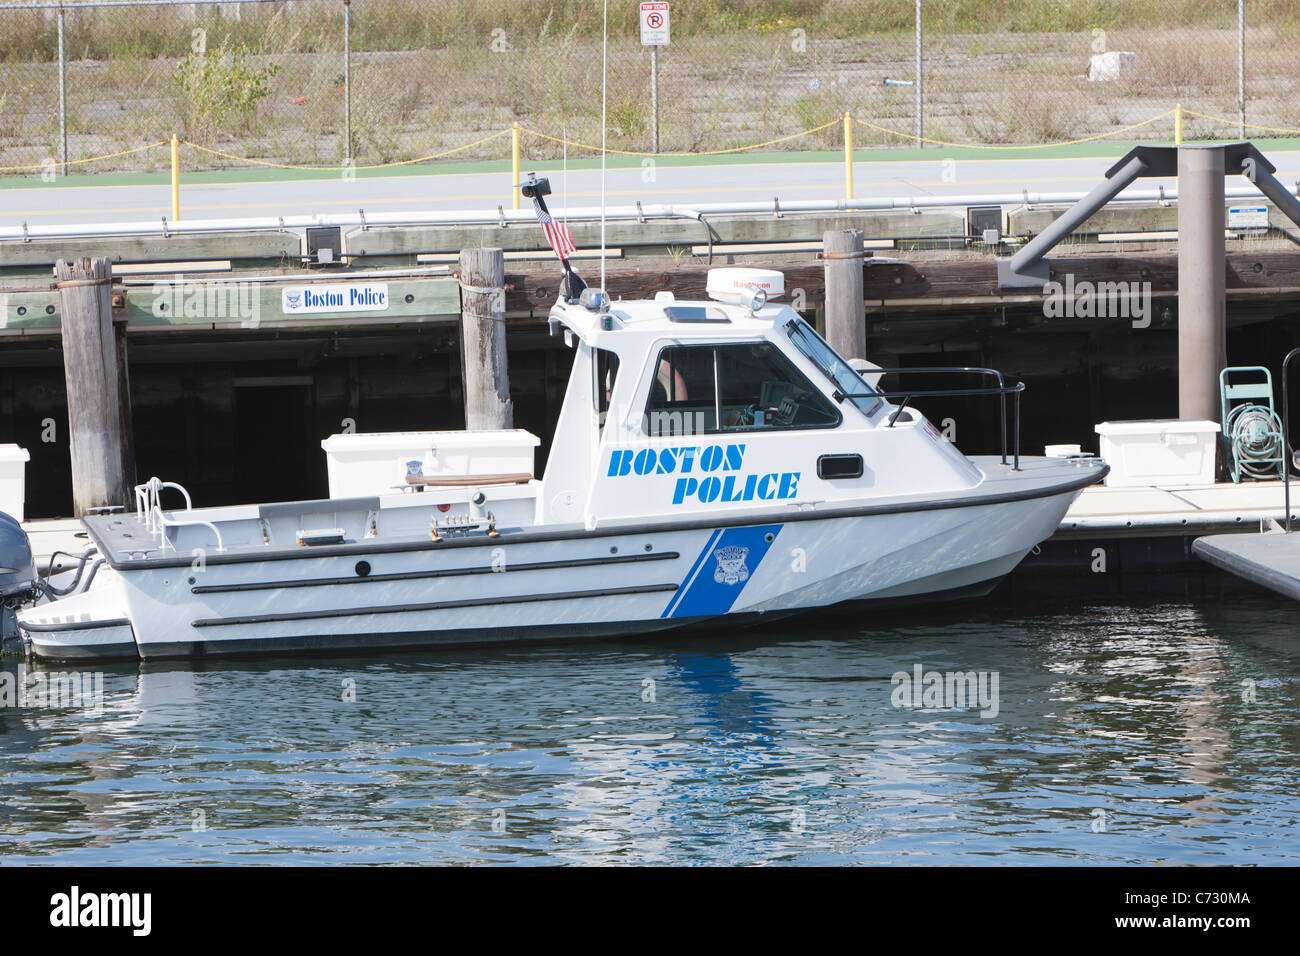 One of the boats of the Boston Police Harbor Patrol Unit, docked just off of Terminal Street in South Boston Stock Photo